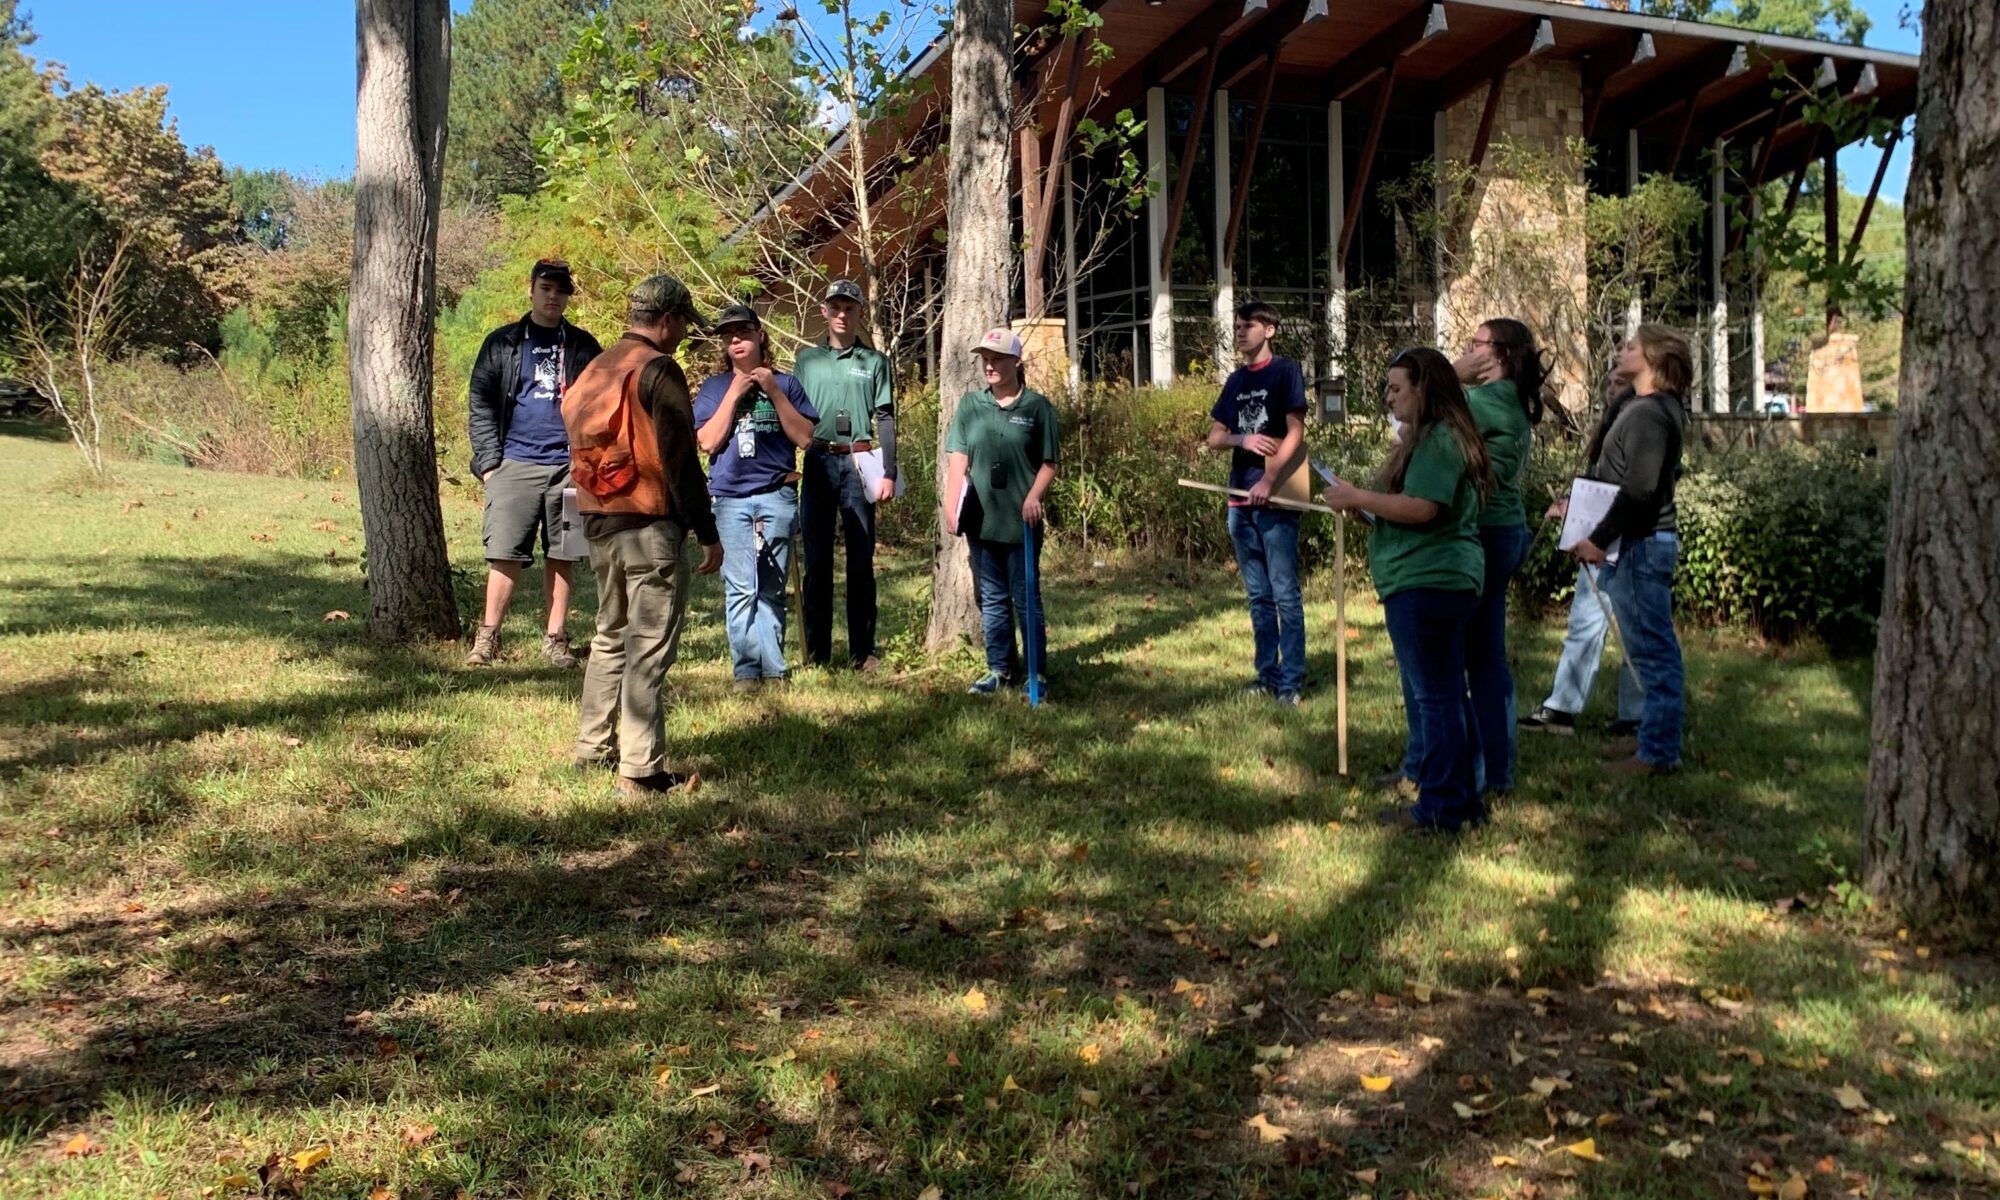 4-H students gather in group for forestry competition.